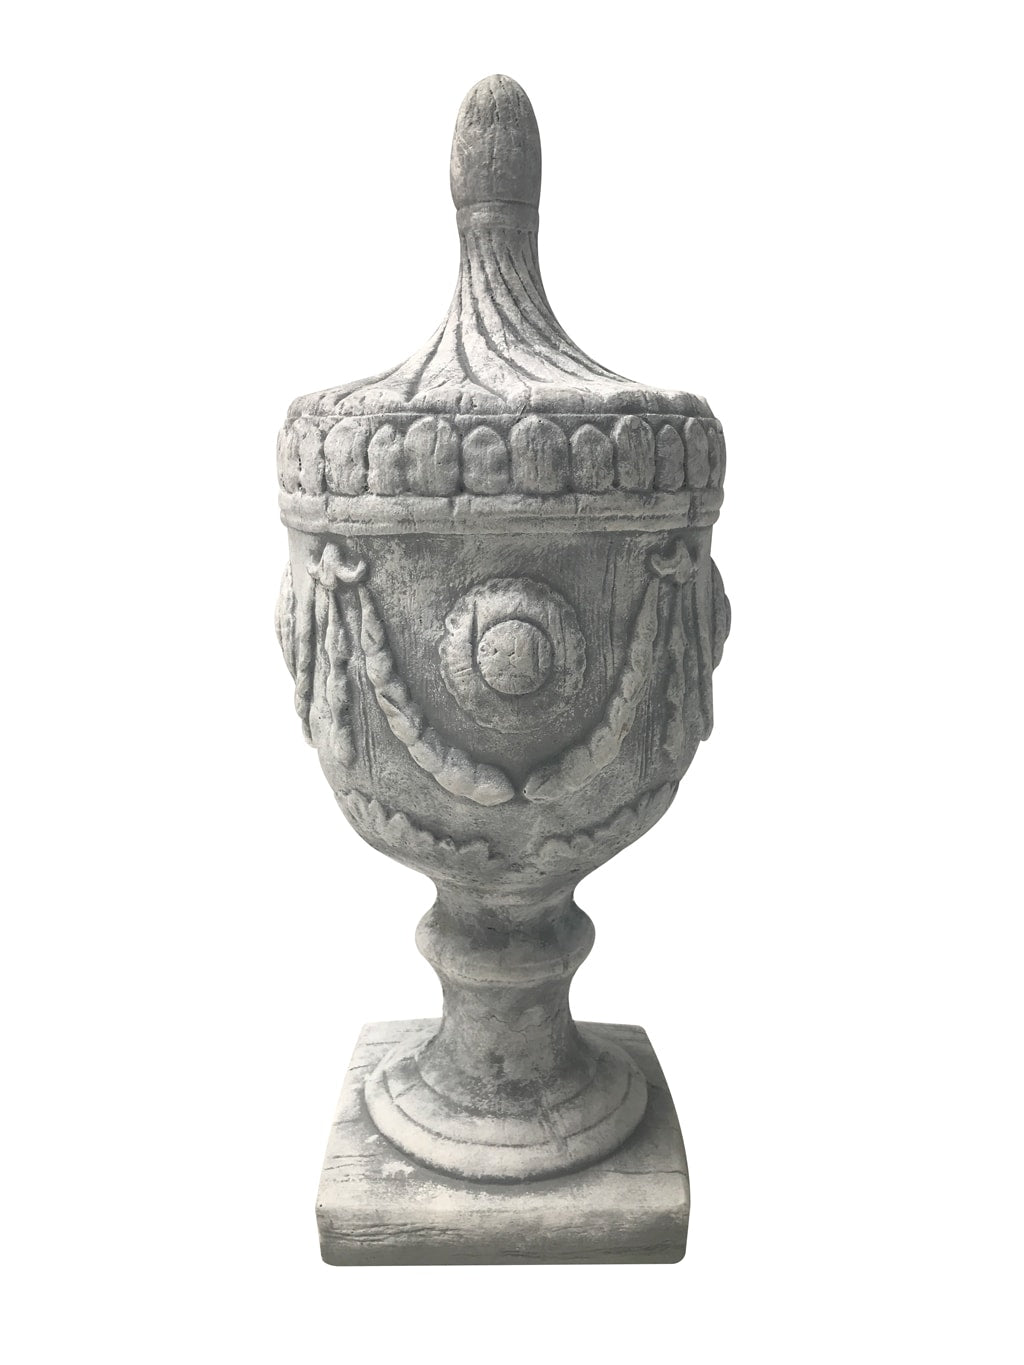 Urn Shaped Decorative Finial Garden Decoration from Antiqued White Stone